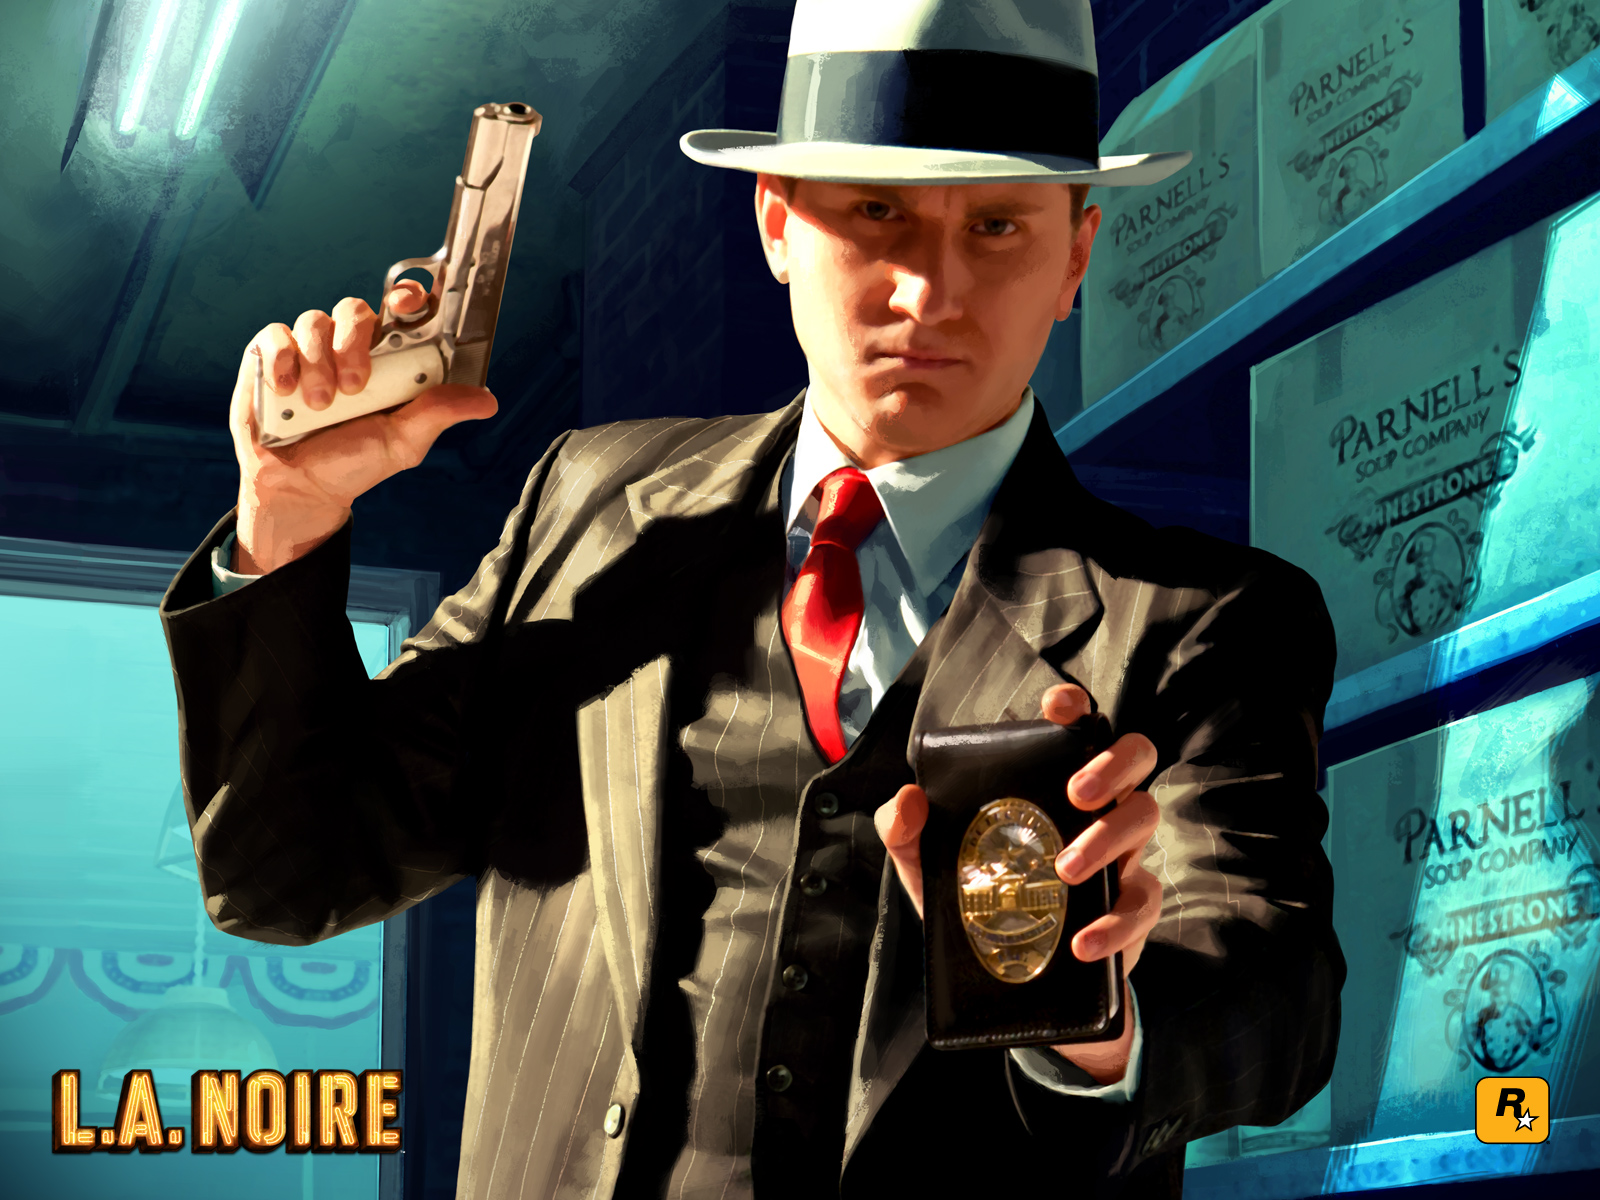 Cole Phelps On The Case